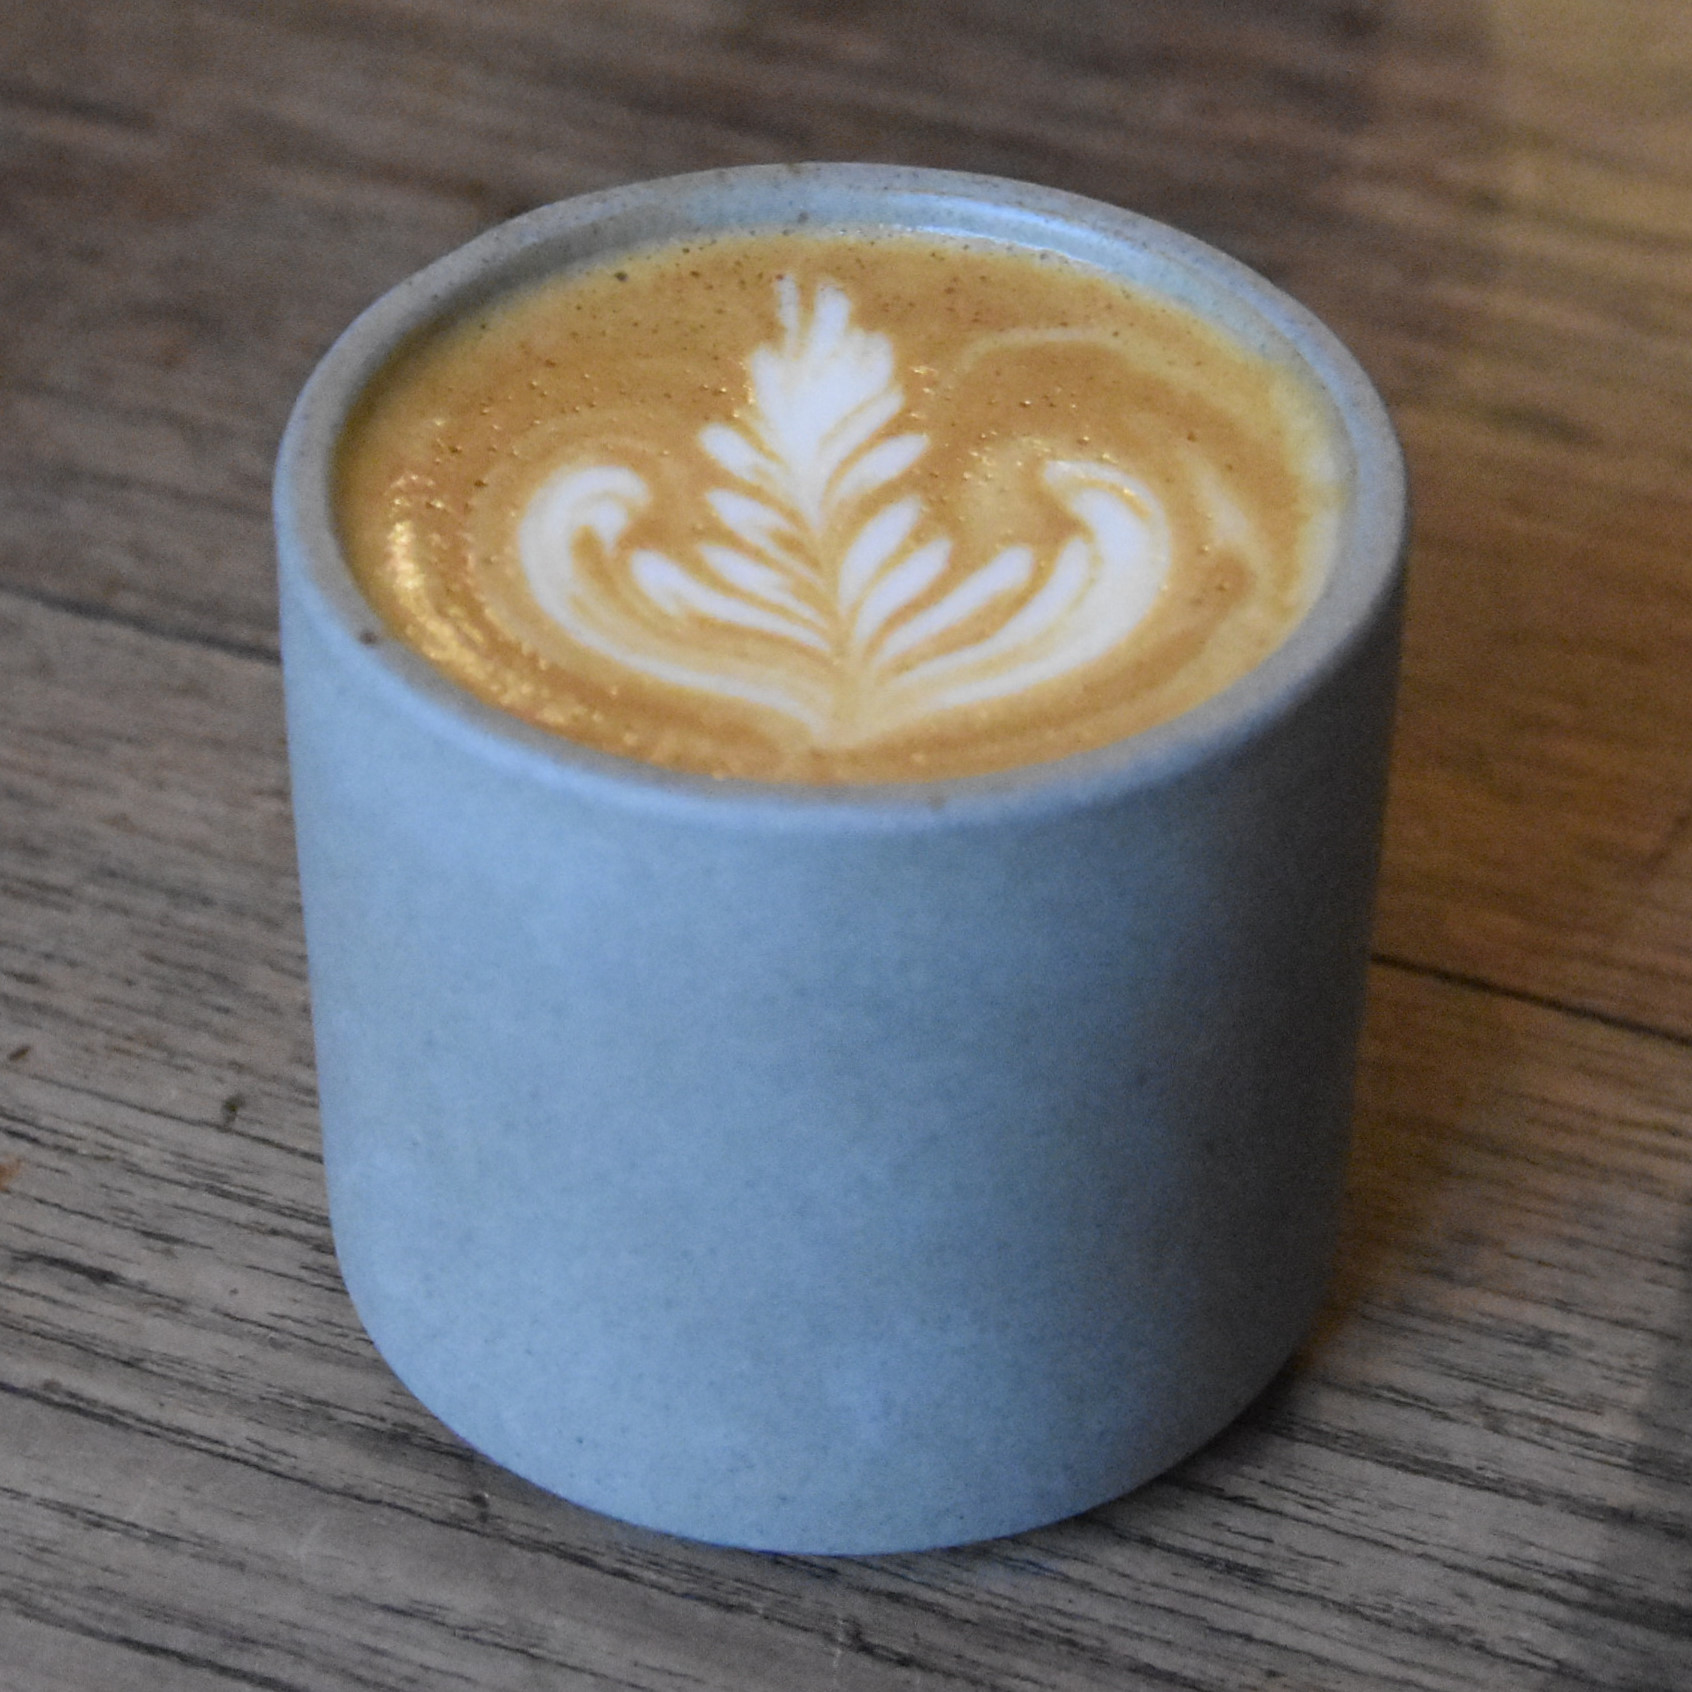 A lovely flat white, made with a Colombian single-origin from The Good Coffee Cartel, and served in handless ceramic cup at Glasgow's East Coffee Company.